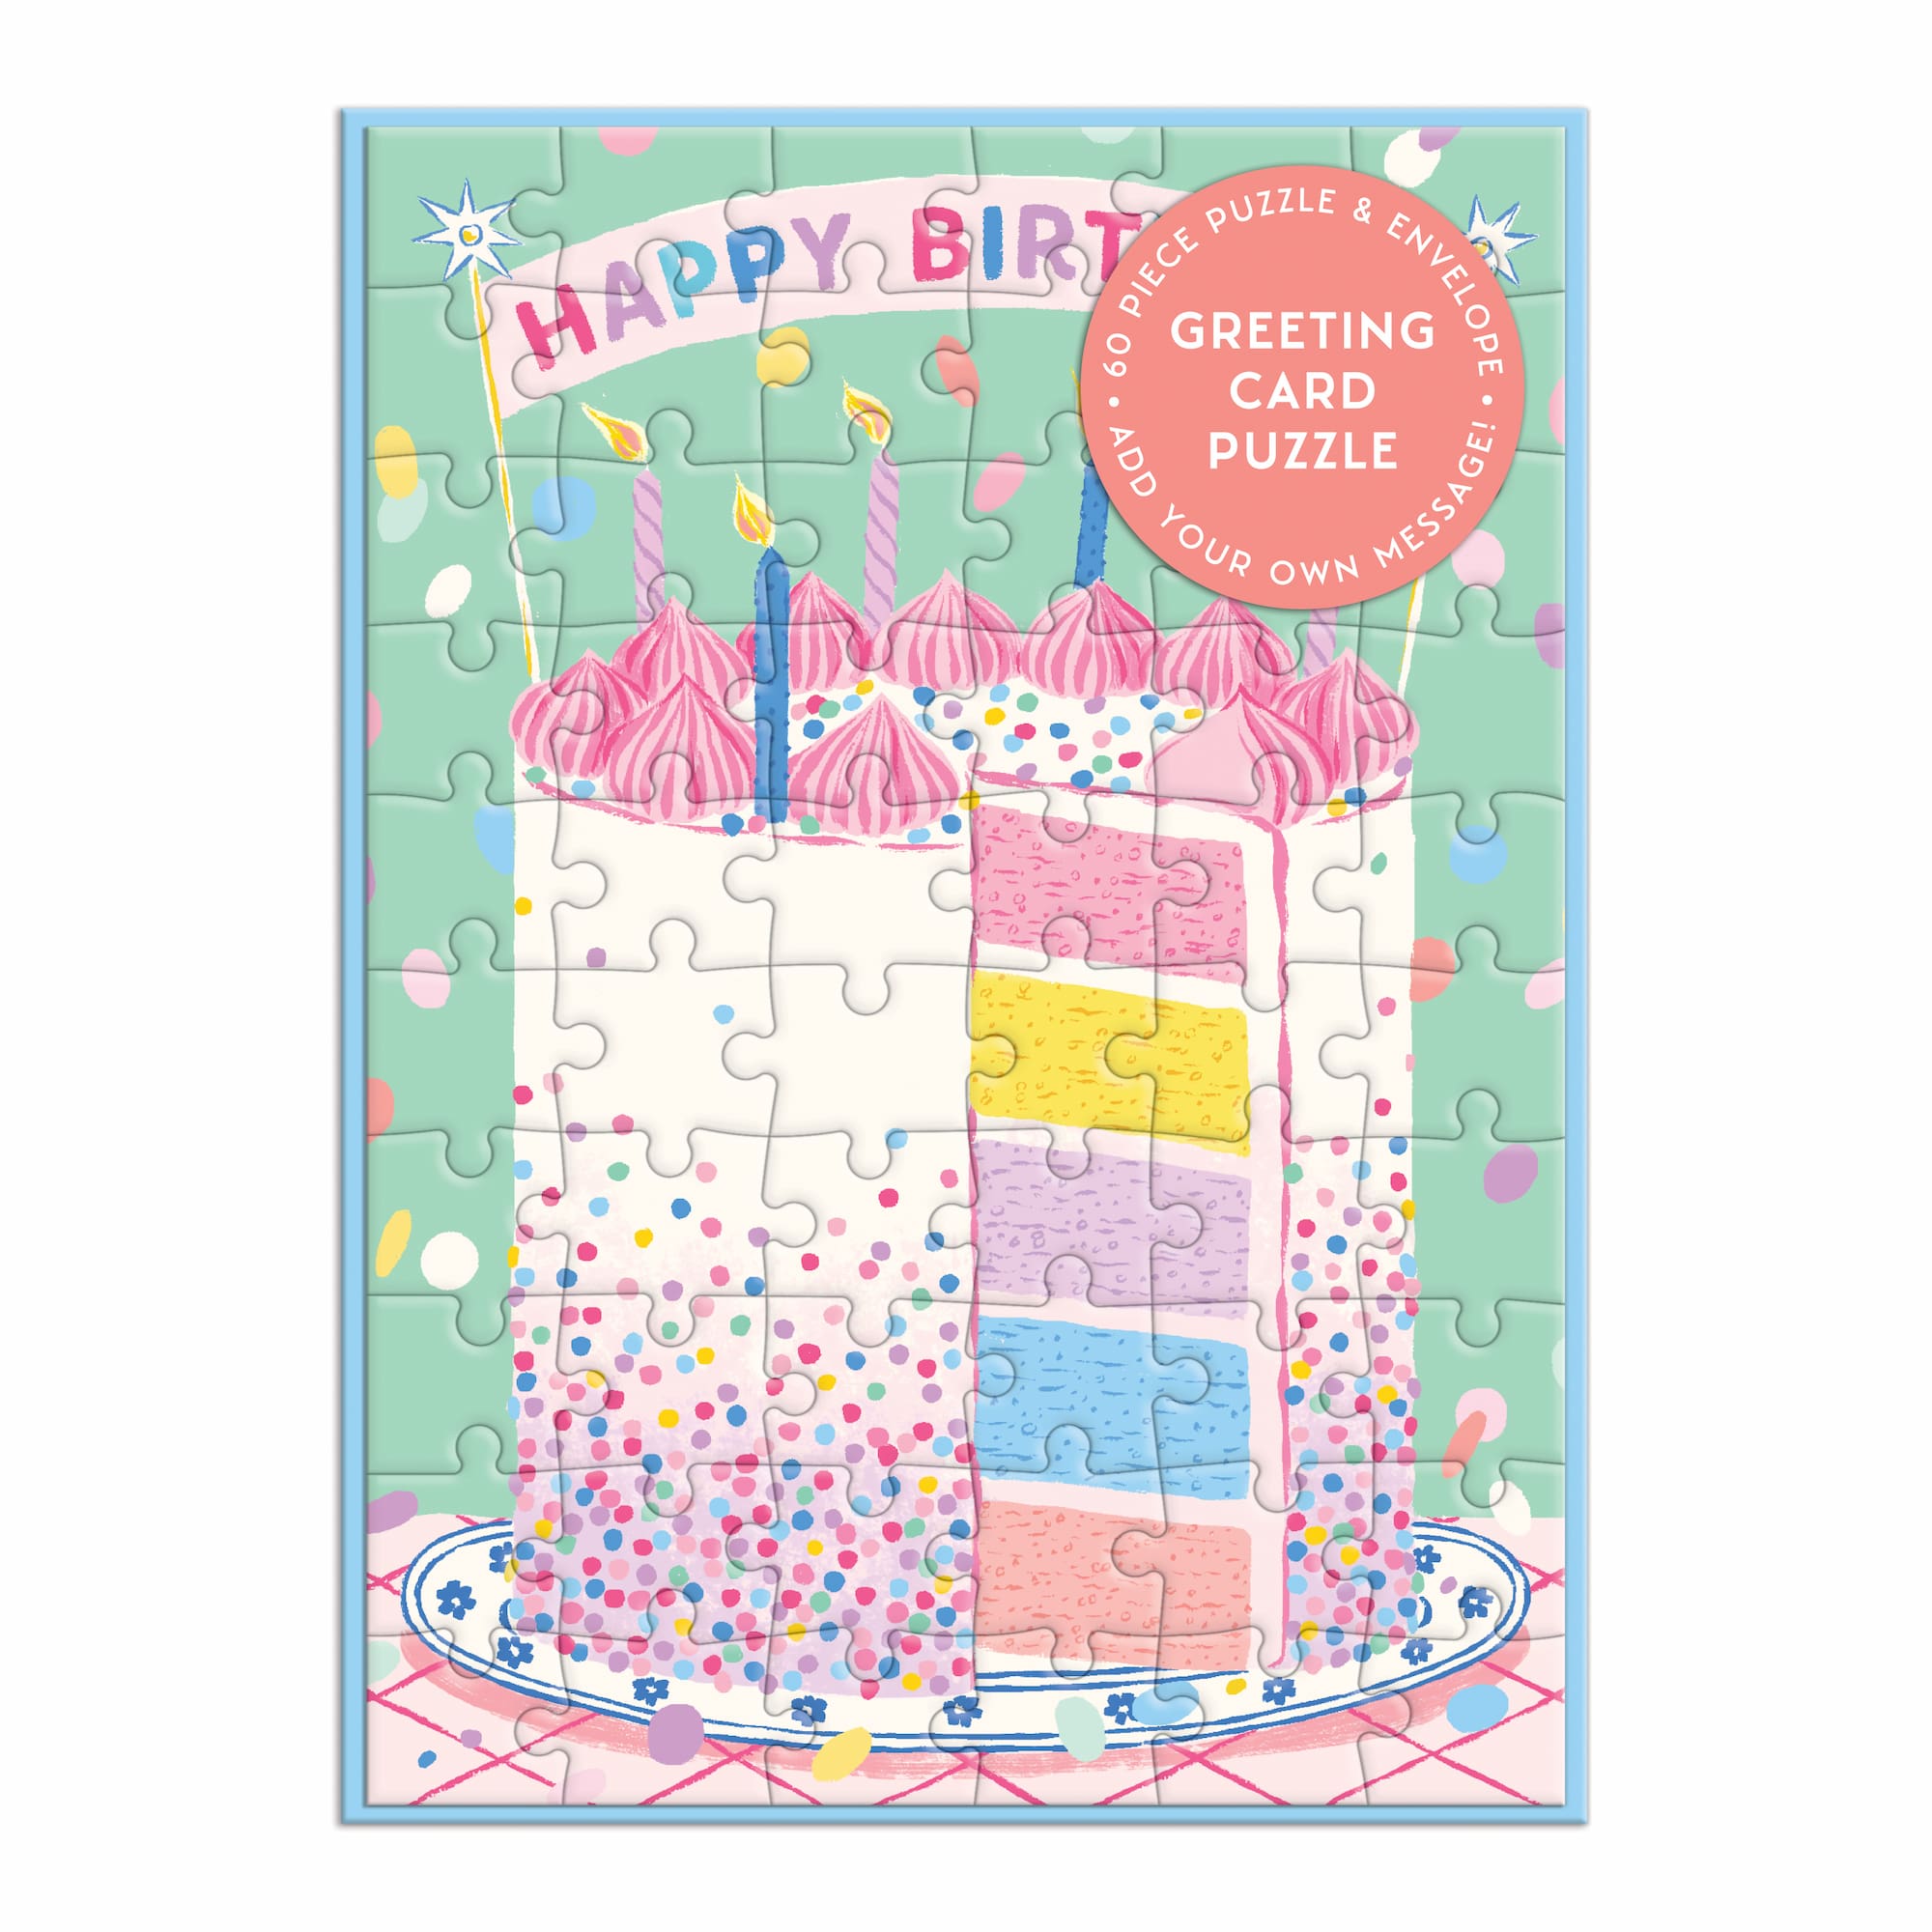 Happy birthday cake wishes greeting card with name edit